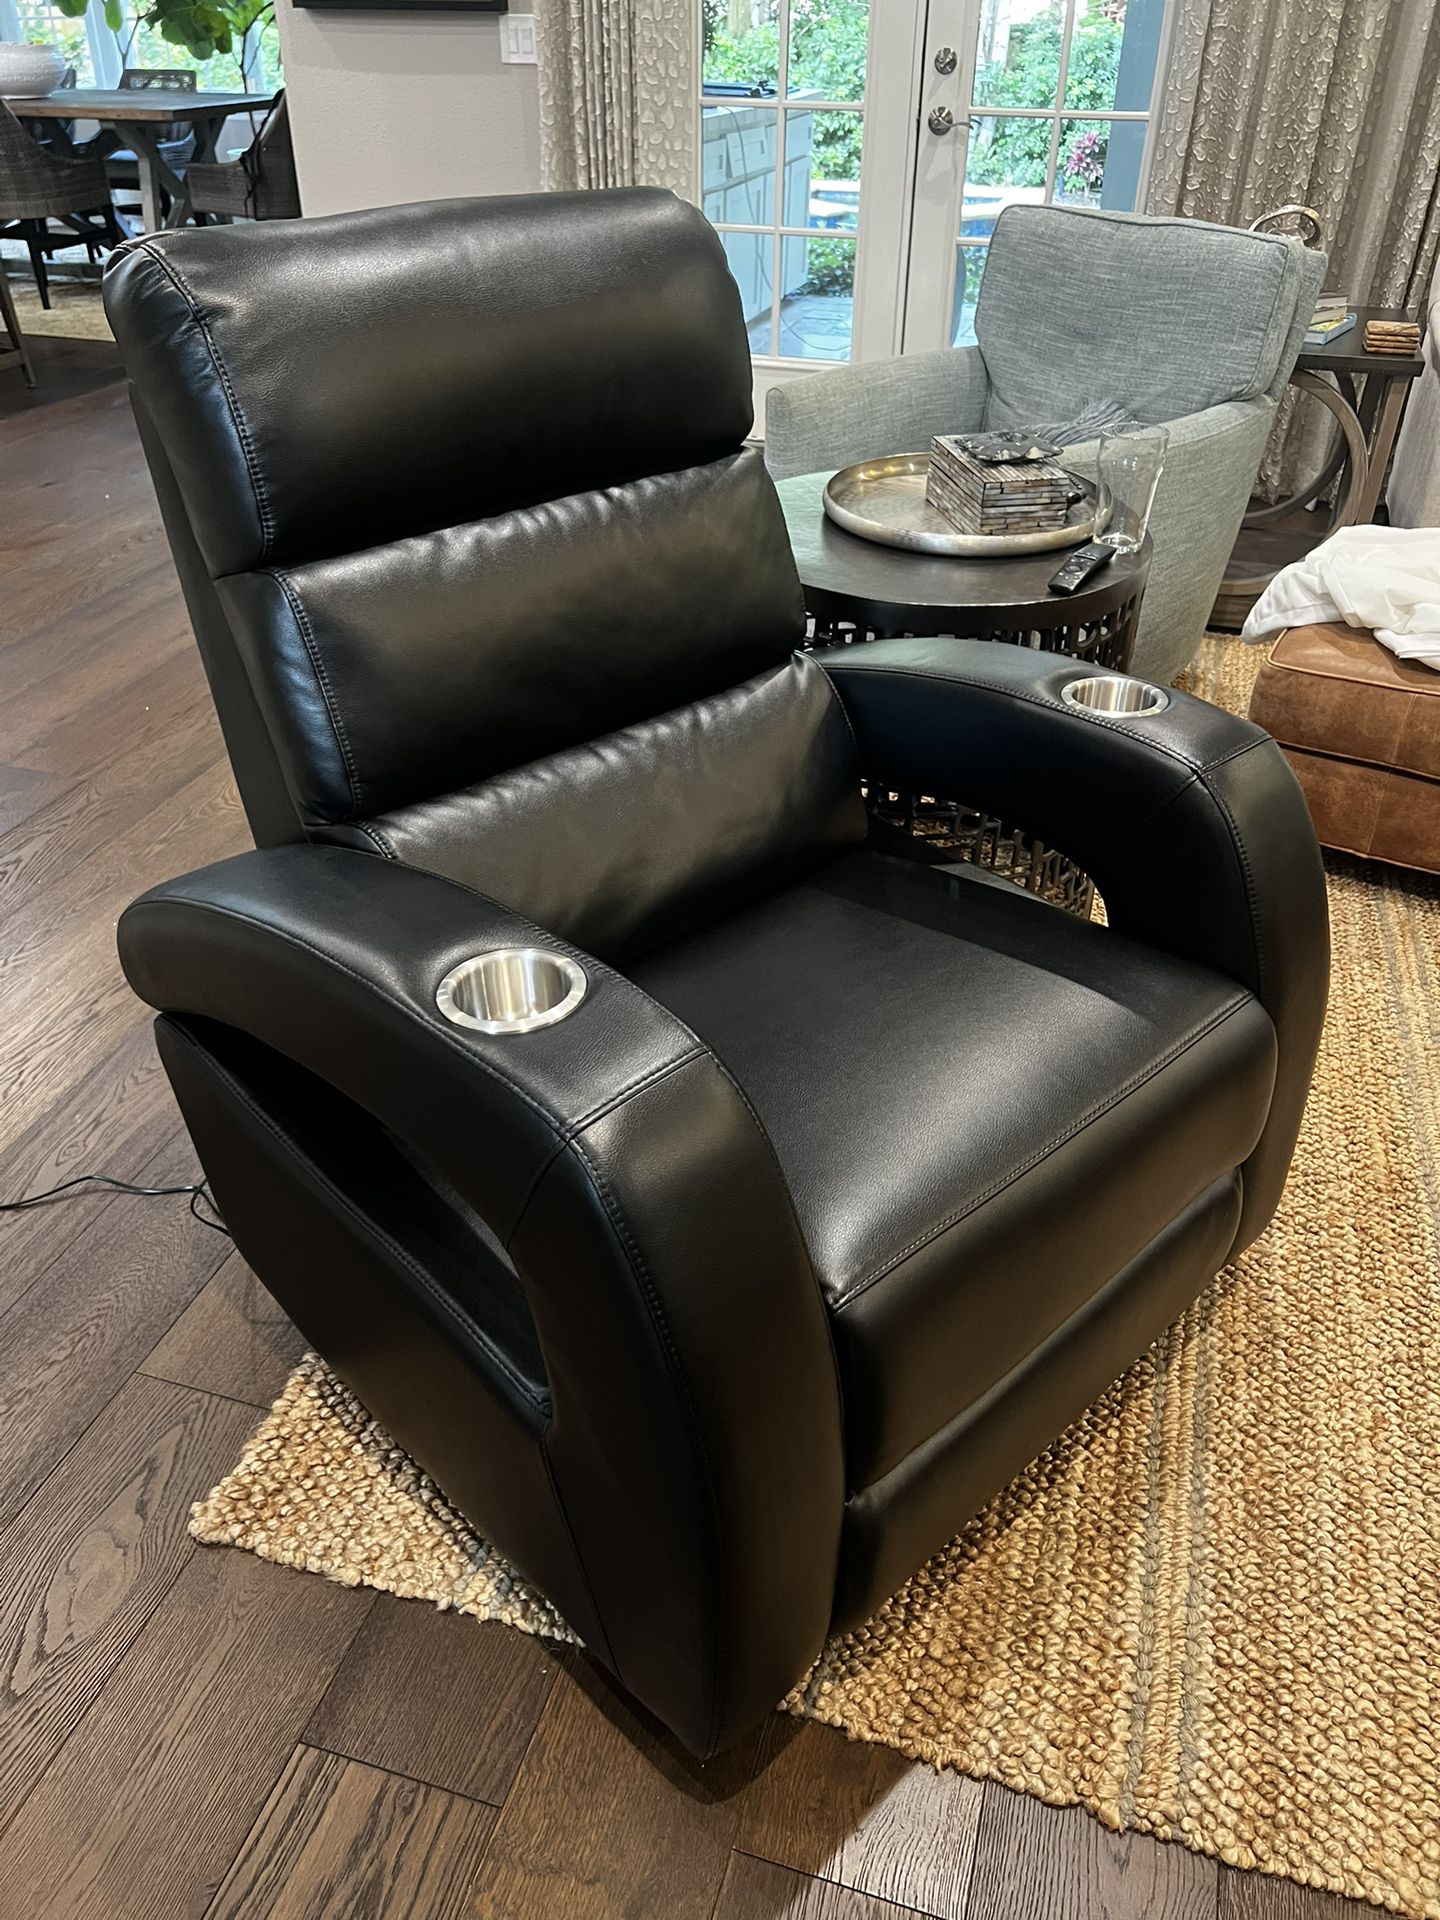 Auto Reclining Leather Chair